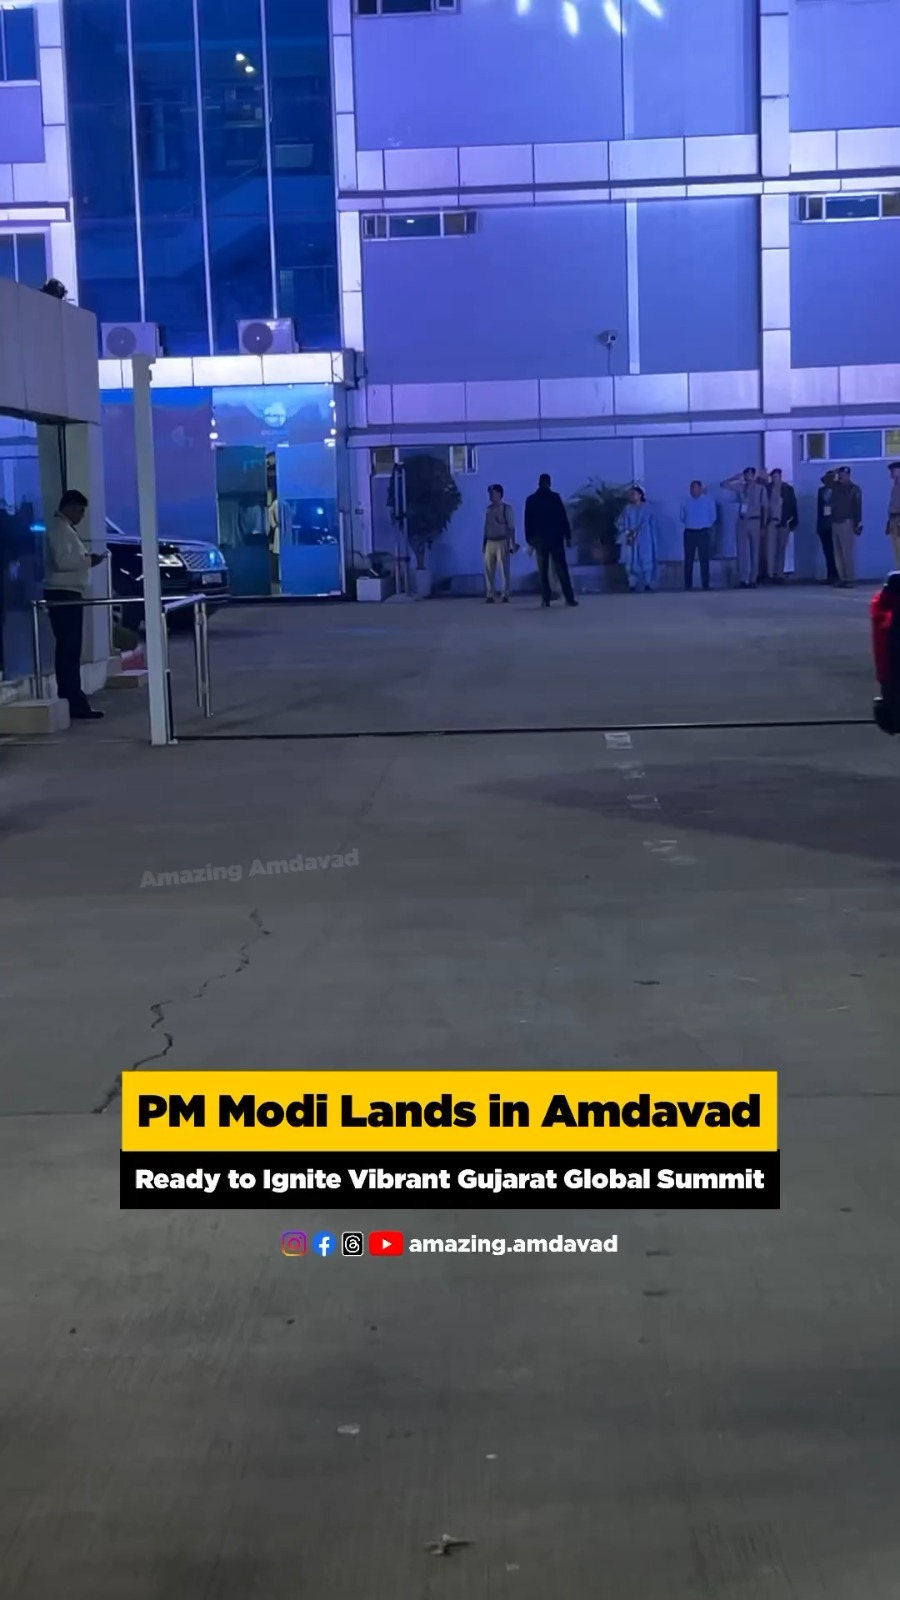 Ahead of Grand Debut, PM Modi Lands in Amdavad